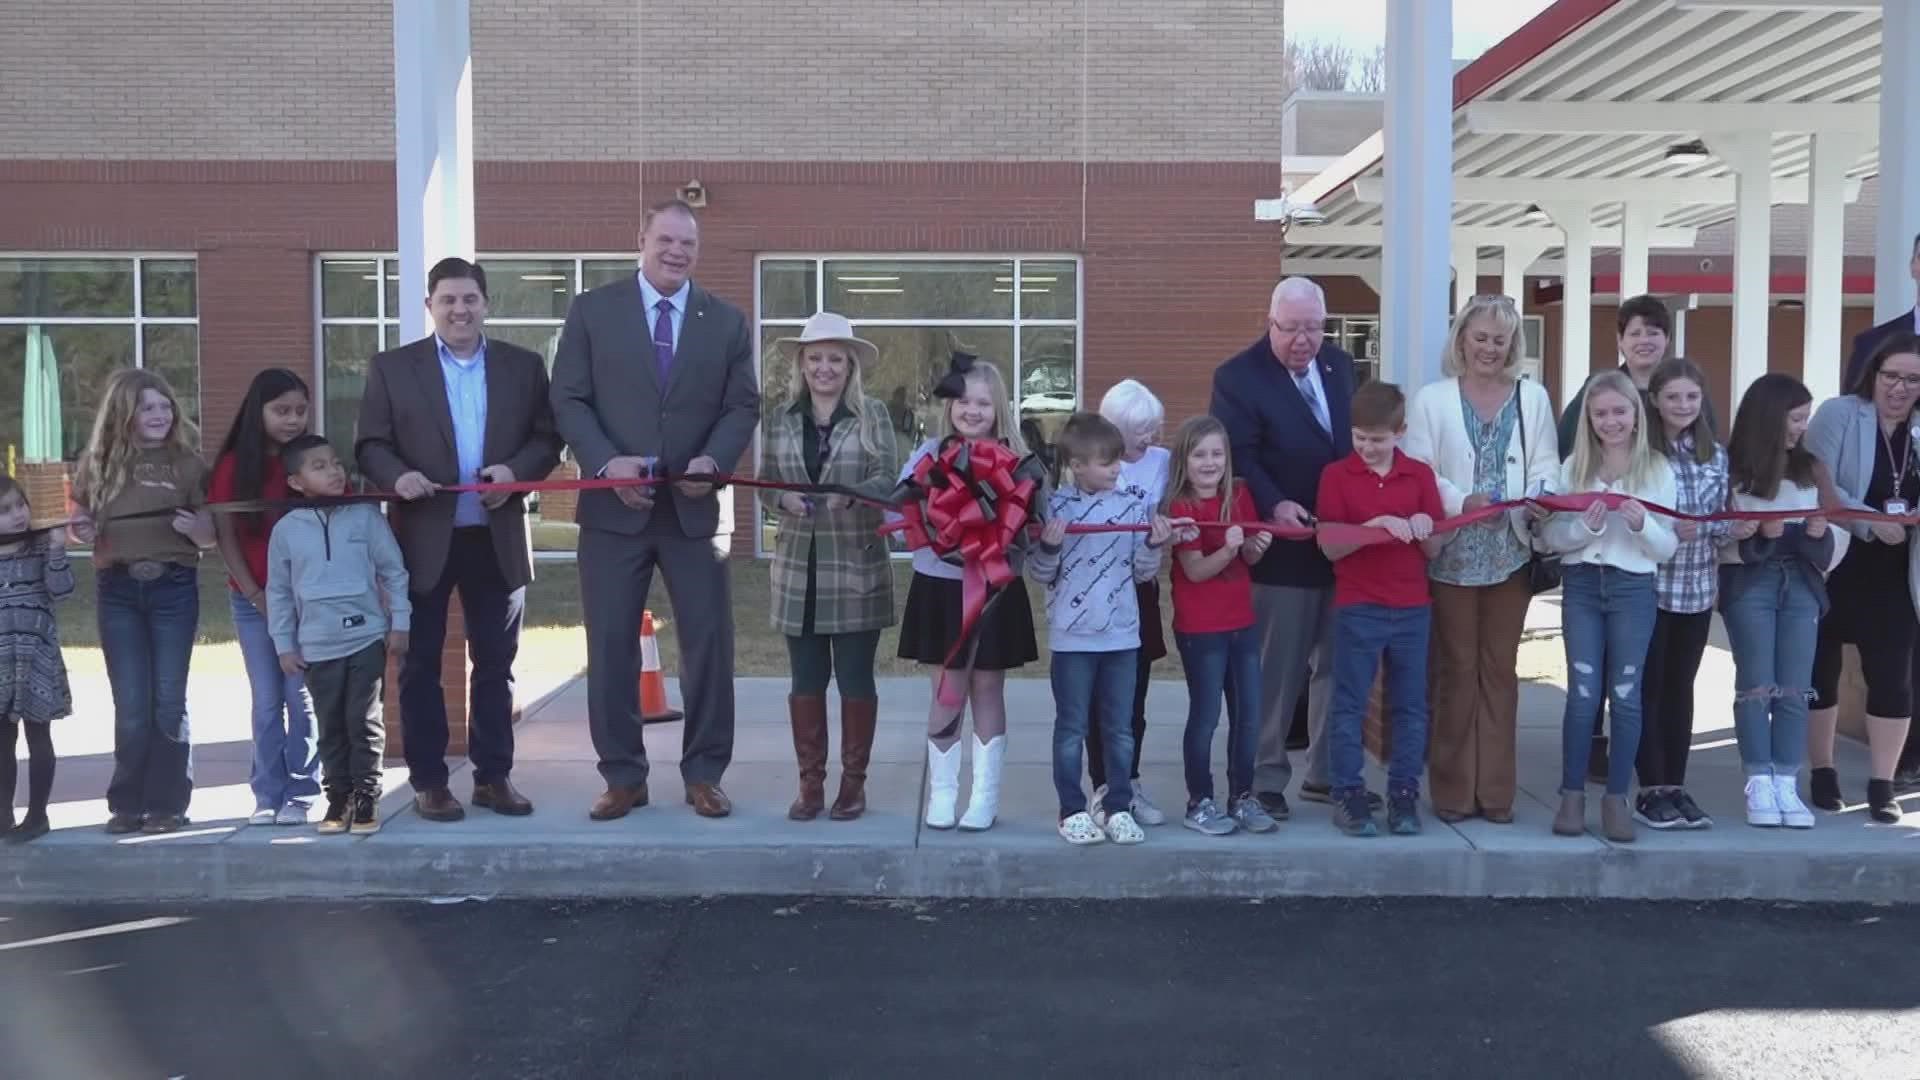 A new school opens to elementary school students in Fountain City on Monday. The new school has 34 classrooms, a 7,100-square-foot gym, a new library and more.